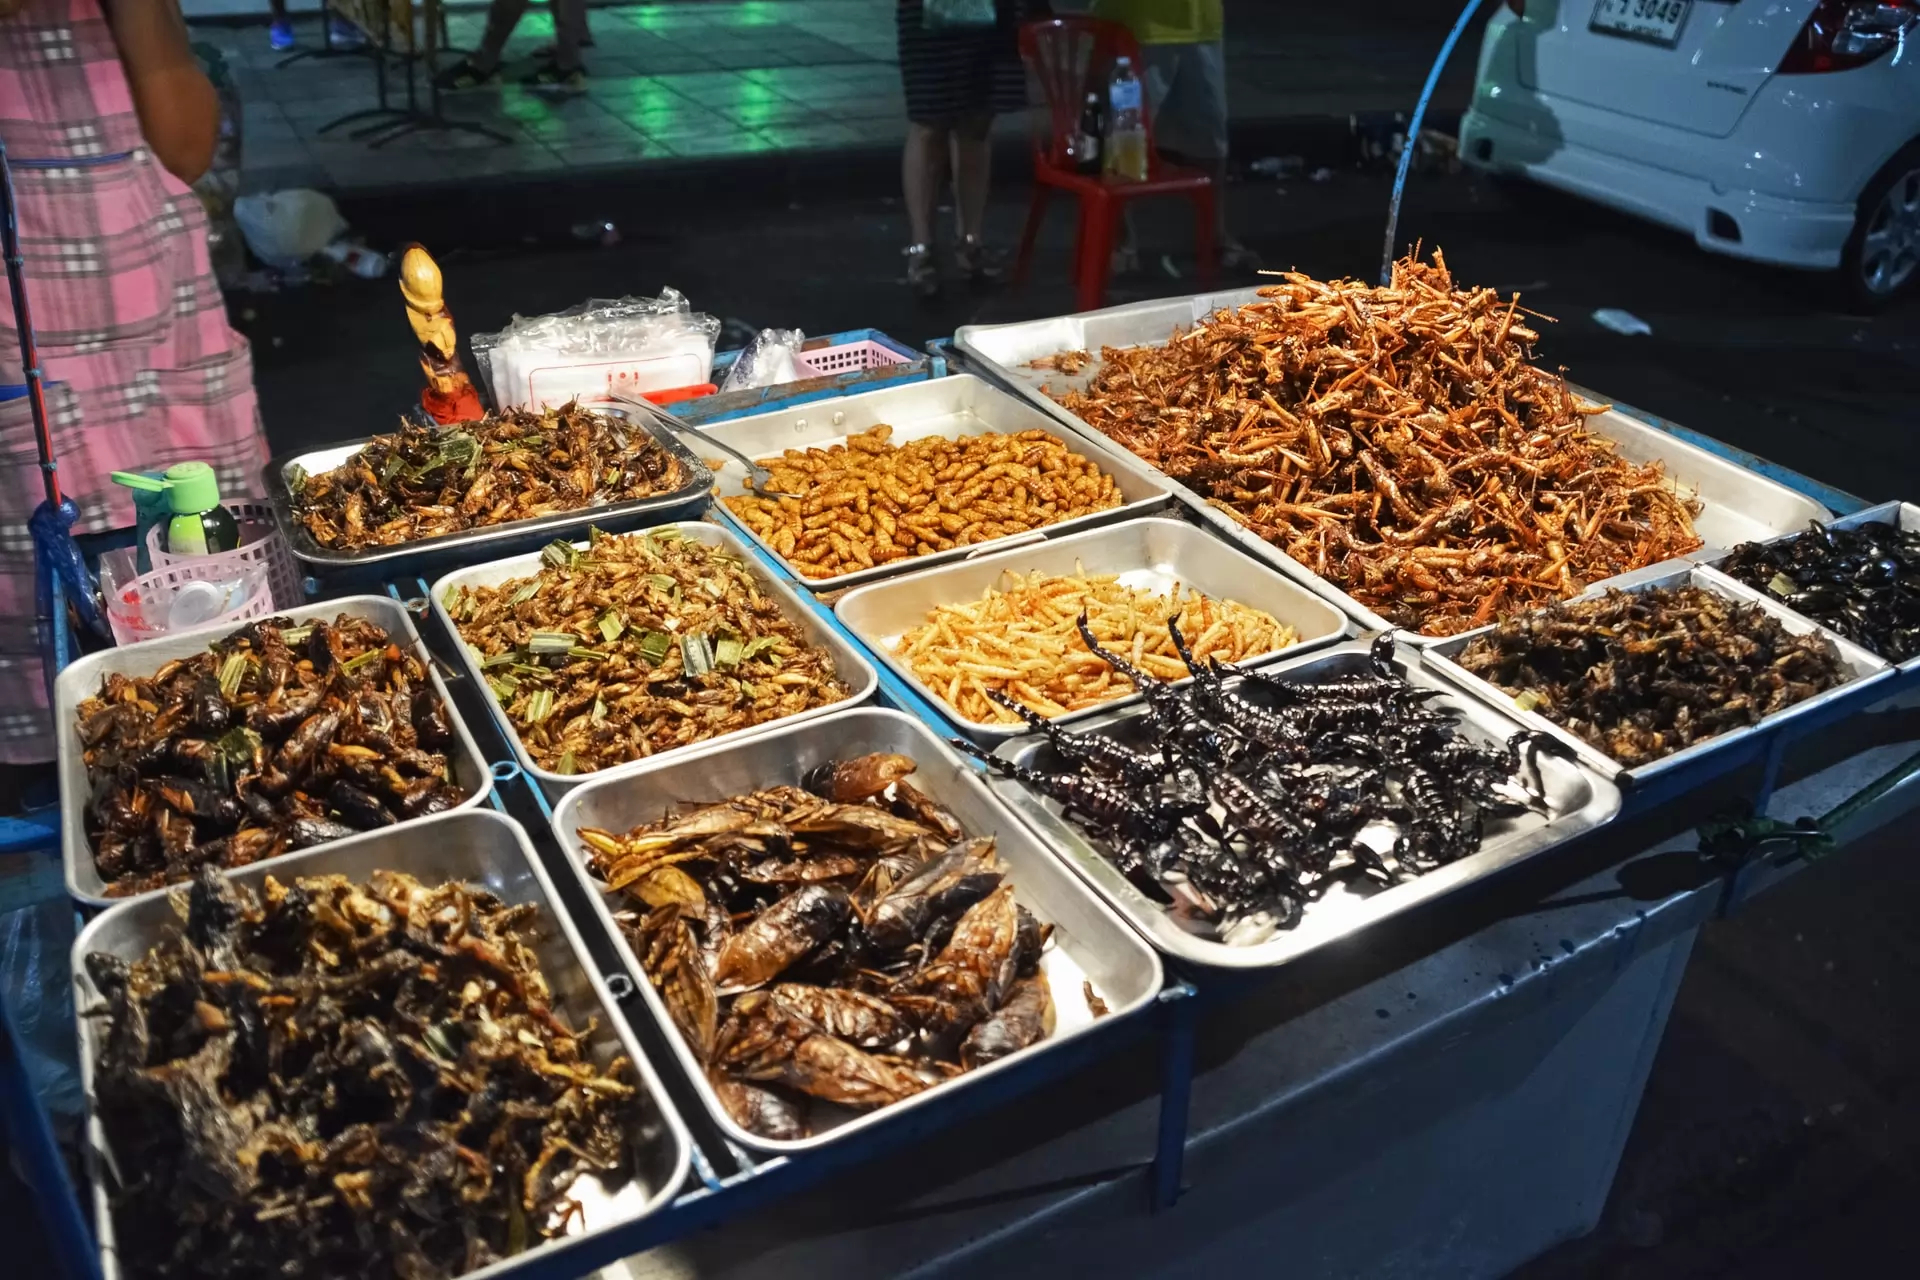 the edible insects market